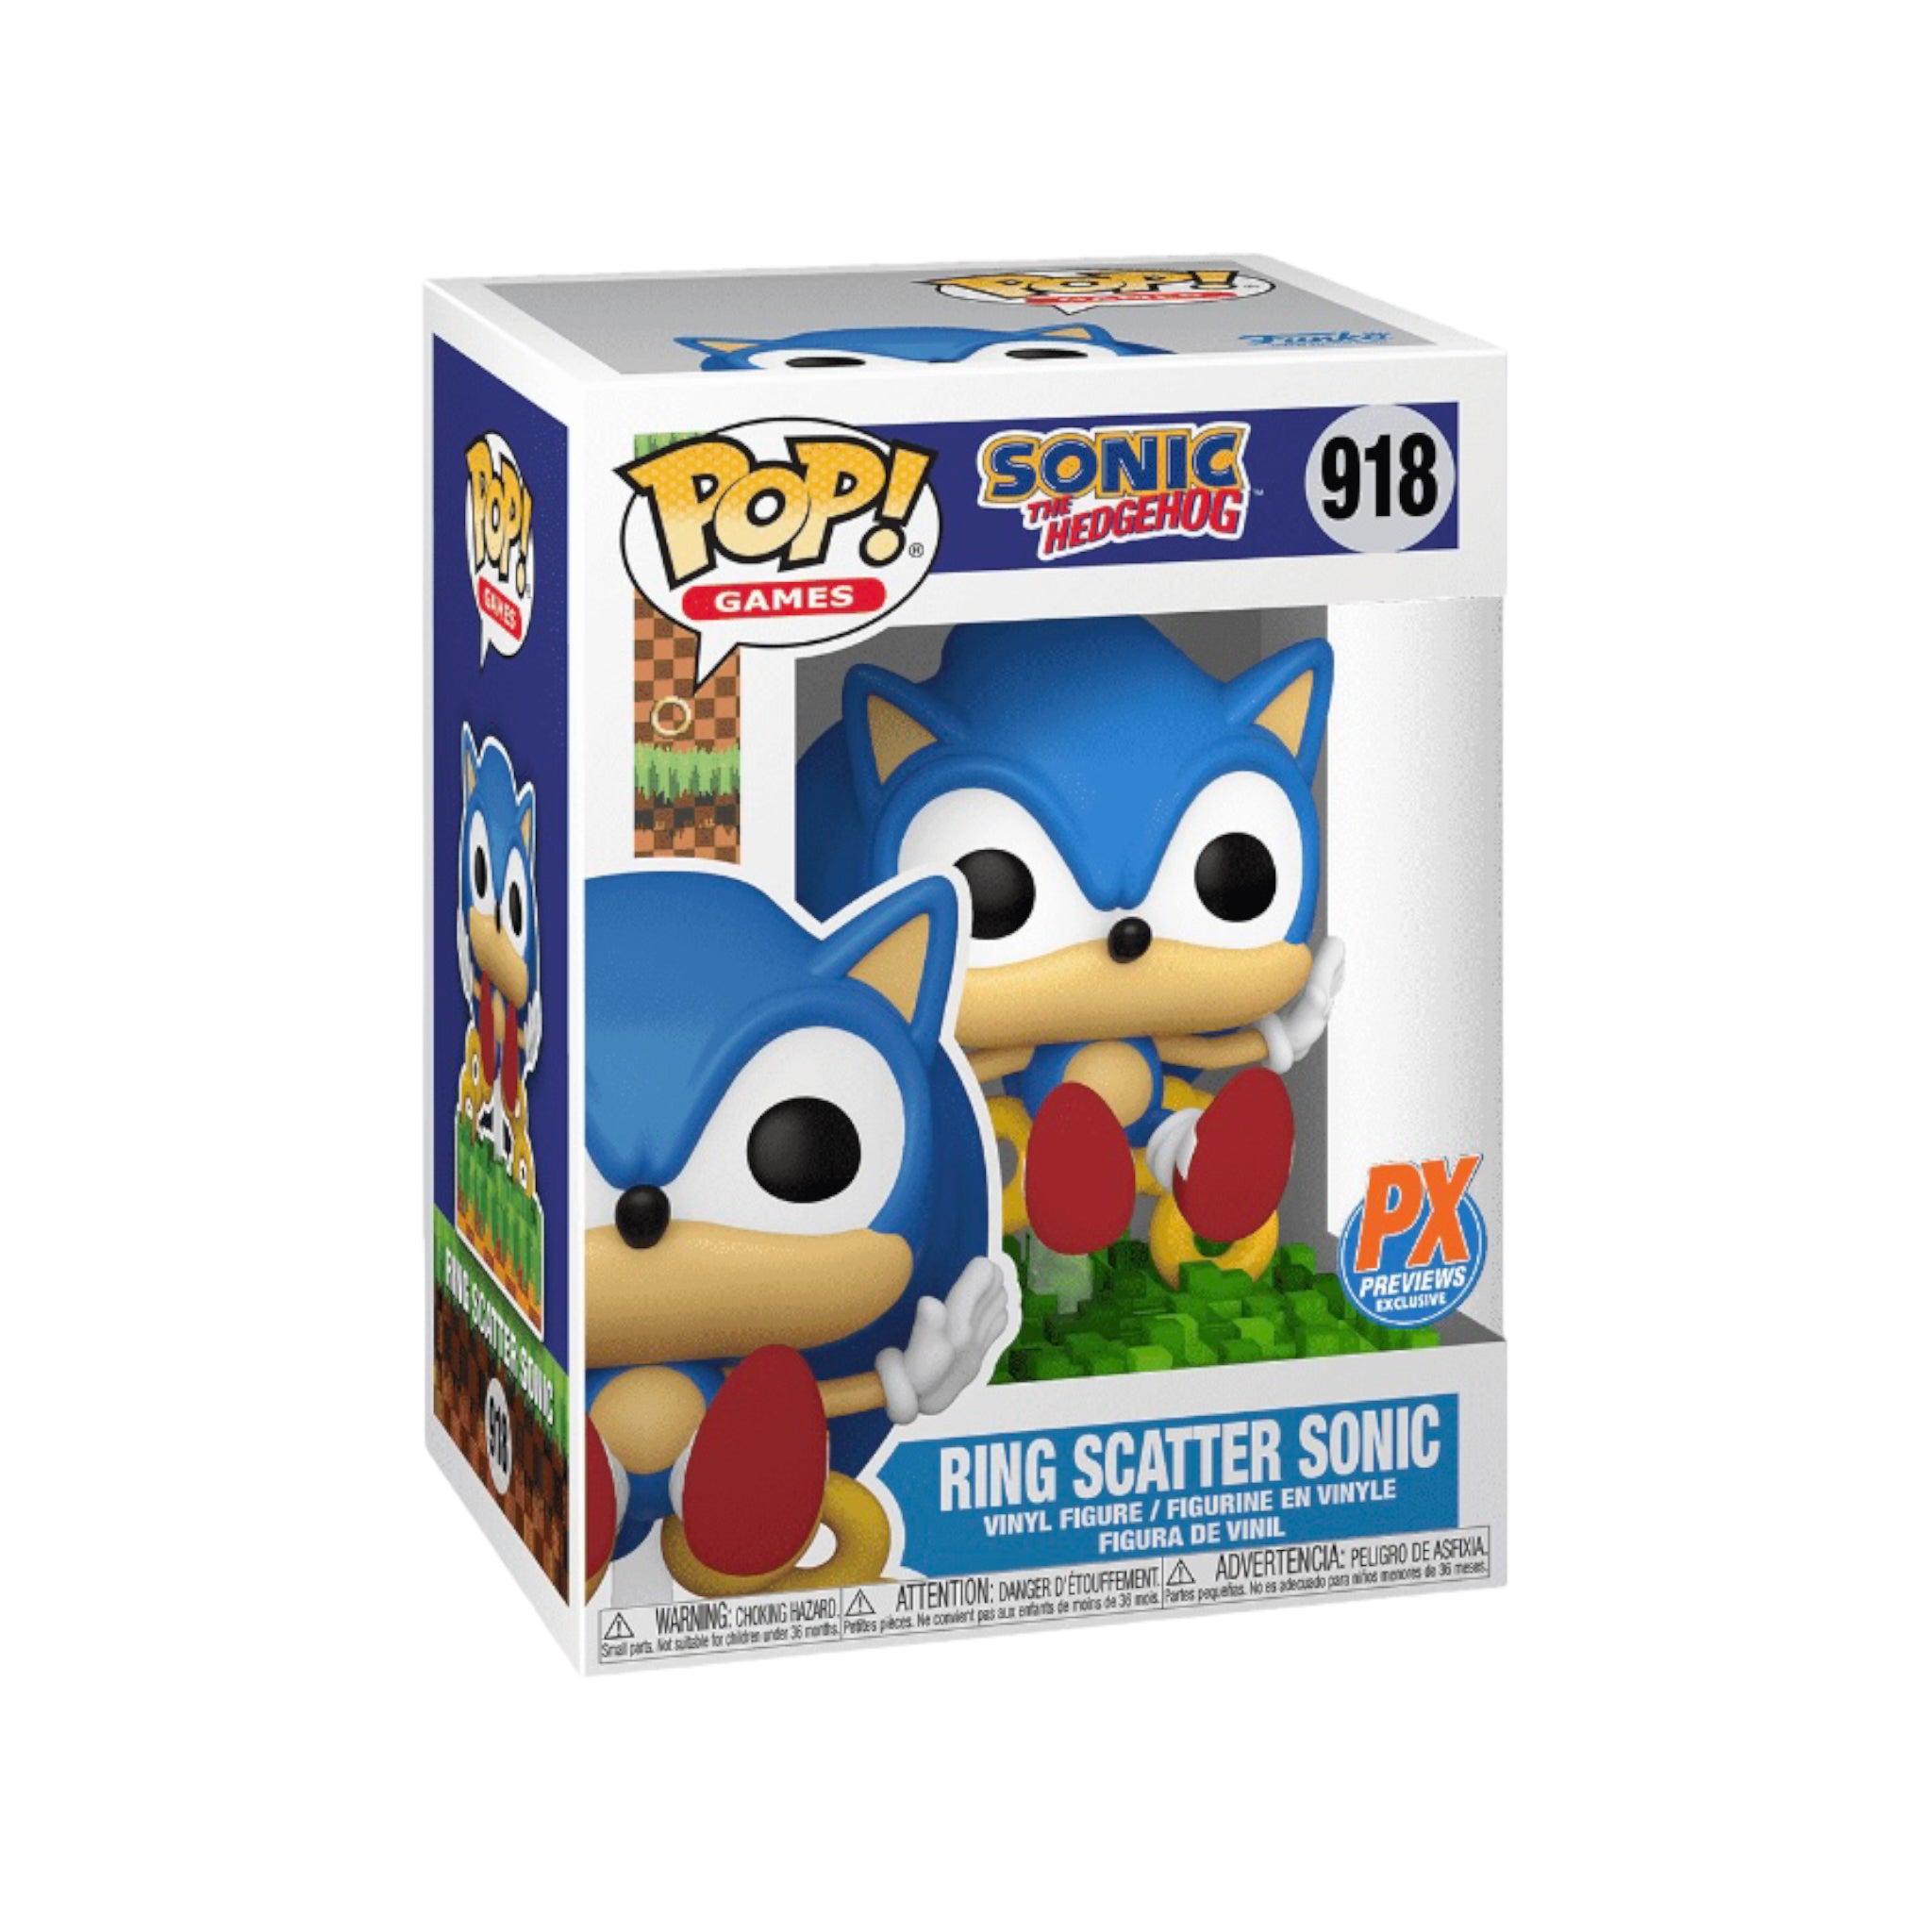 Ring Scatter Sonic #918 Funko Pop! - Sonic The Hedgehog - PX Previews Exclusive